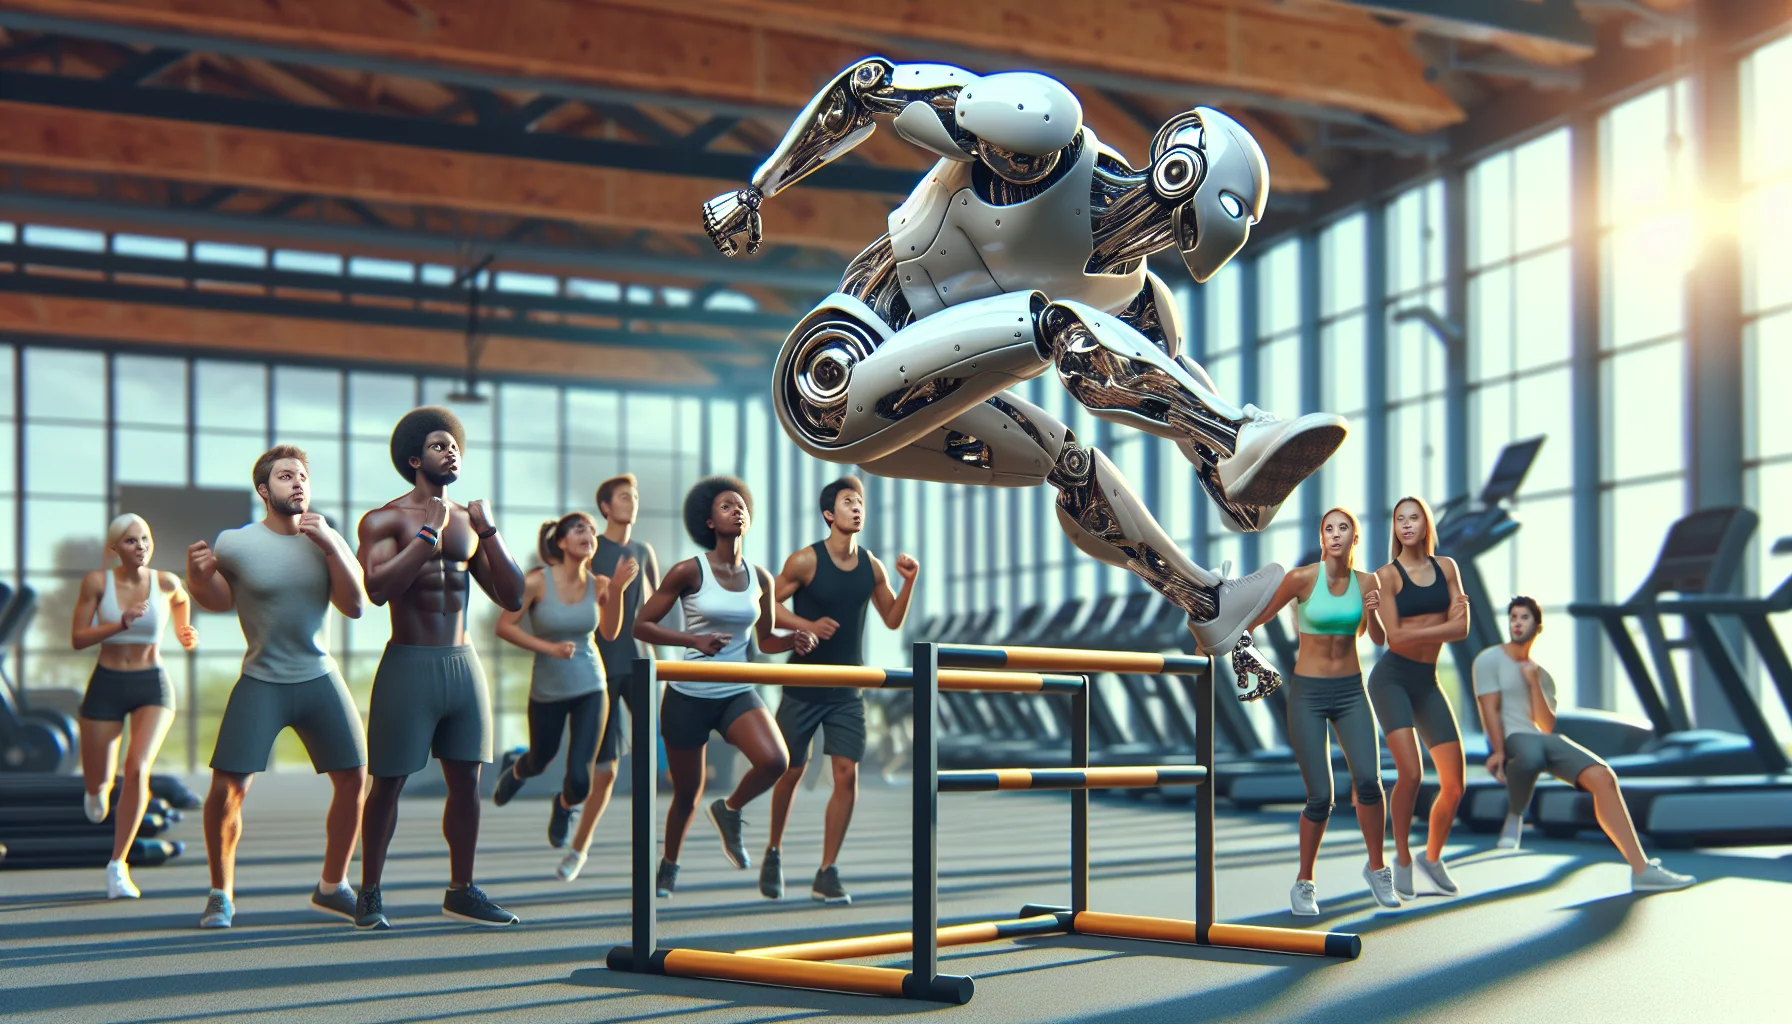 Generate a humorous scene depicting an imaginative robot displaying heroic parkour abilities in a public area filled with workout equipment, with the intent of inspiring human observers around to partake in physical exercises. The robot can be shown jumping over hurdles, sliding under obstacles, and swiftly moving around with agility and precision. The human observers, comprising of a diverse mix of genders and descents such as Caucasian, Black, Hispanic, Middle-Eastern, and South Asian, display a wide range of emotions from shock and intrigue to amusement, reflecting their engagement in the robot's stunt-filled exhibition.